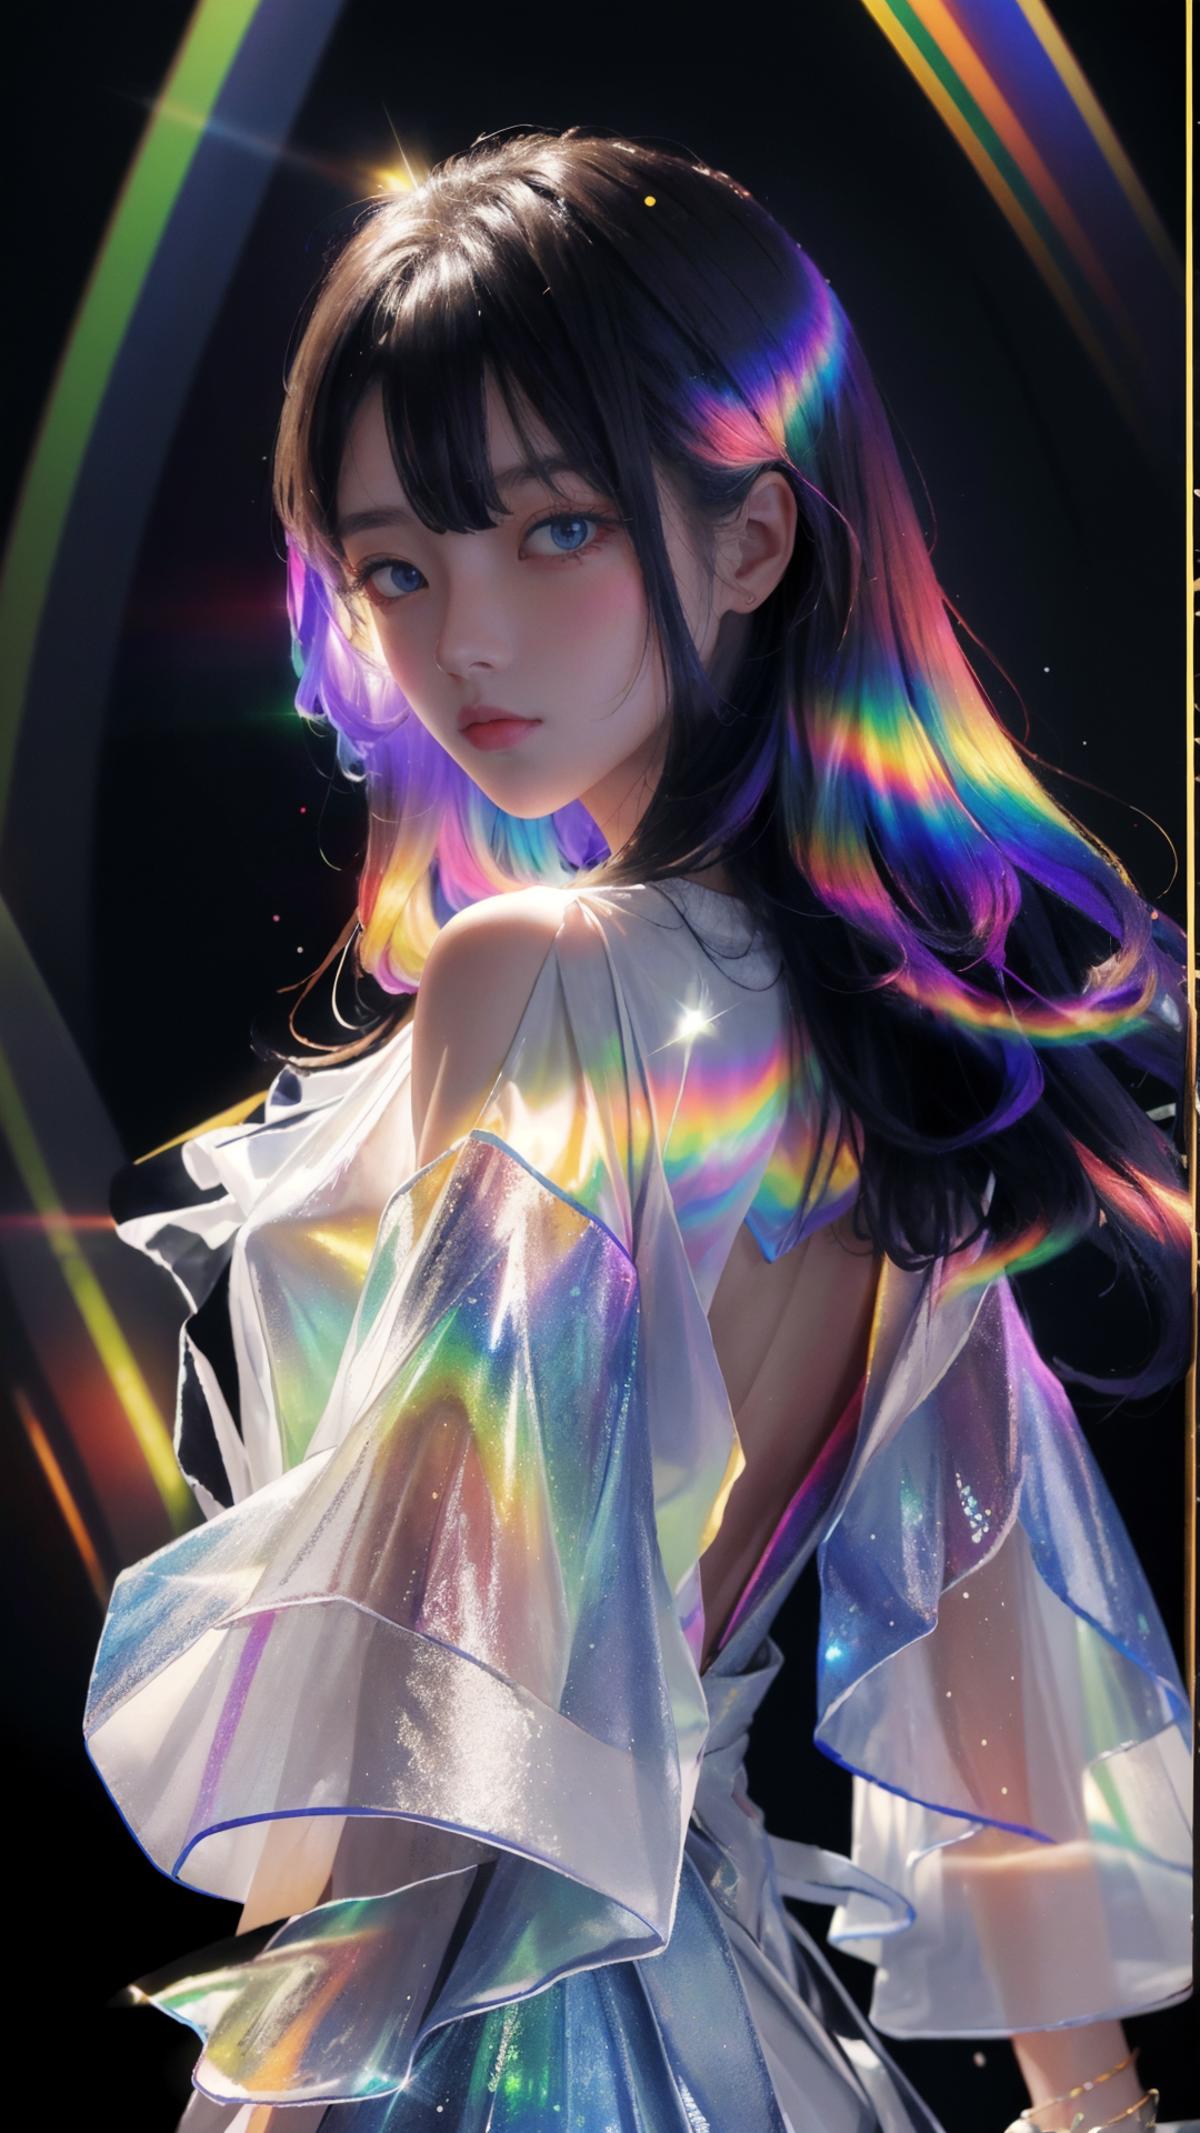 Digital art of a woman with a rainbow-colored background and blue eyes.